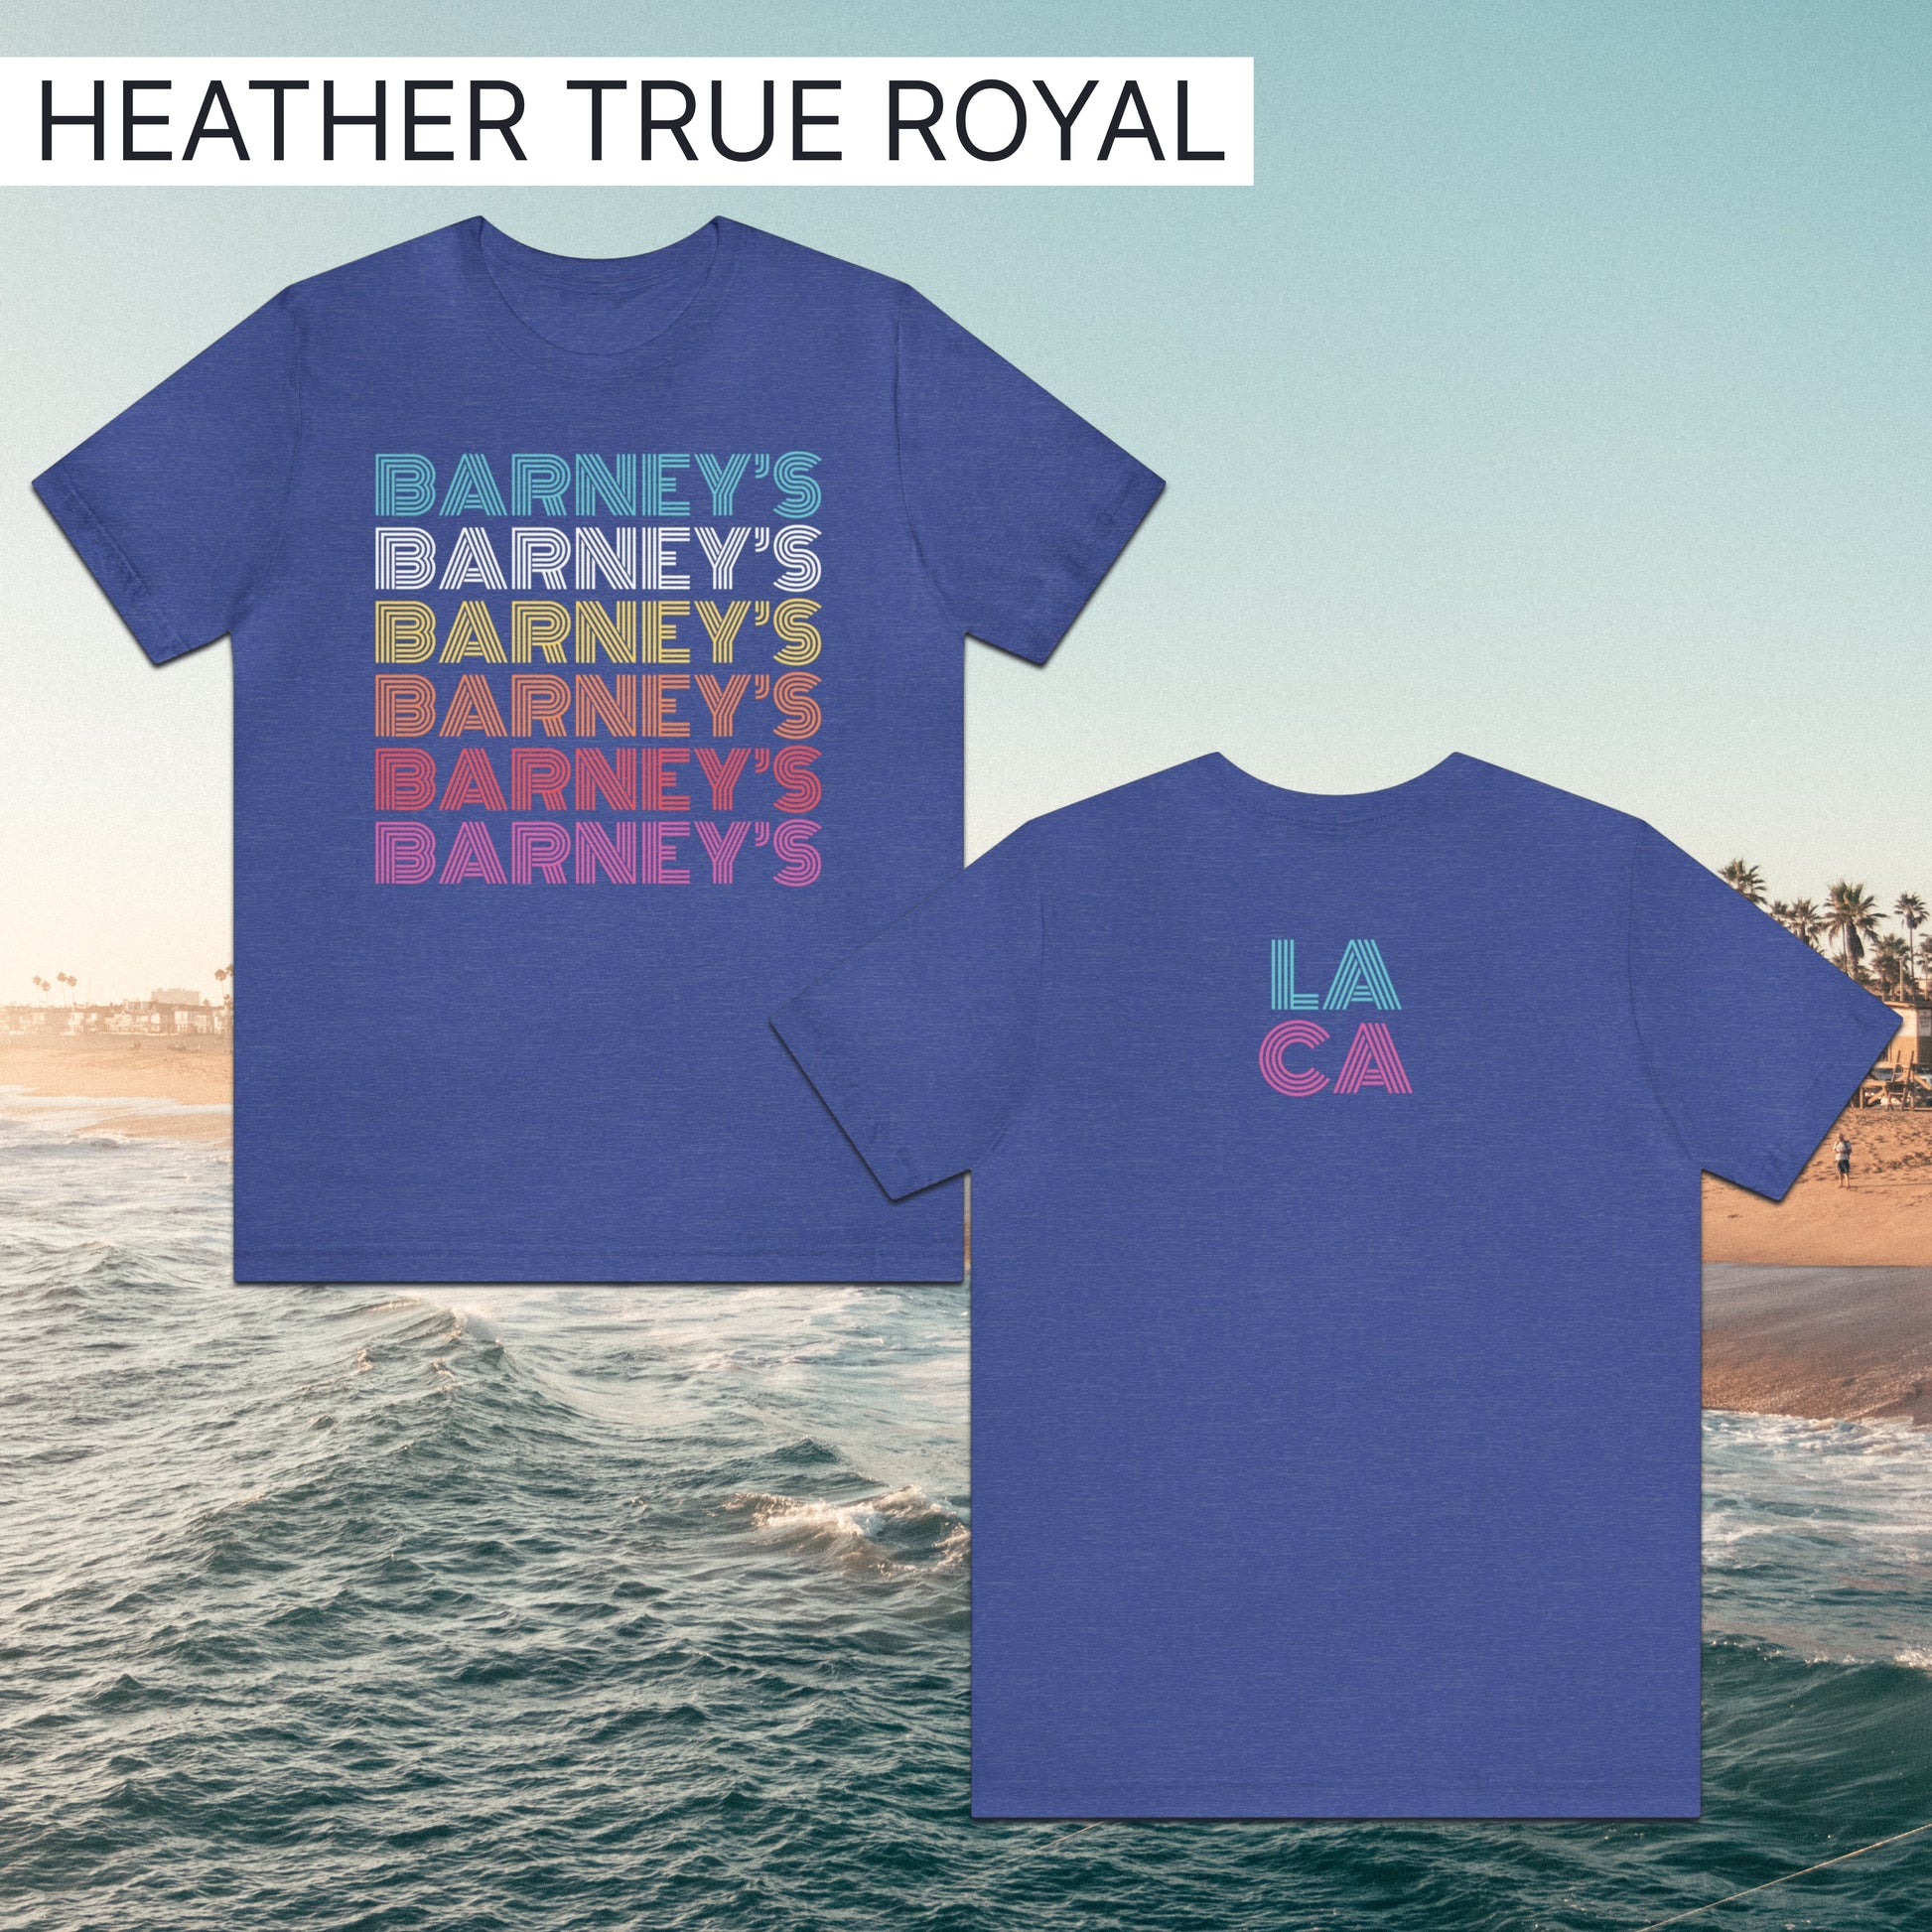 Barney's x6 Retro Hollywood | BARNEY'S BEANERY - Women's Retro Graphic Tee | Heather True Royal Bella+Canvas 3001 T-Shirt - Front And Back Flat Lay View